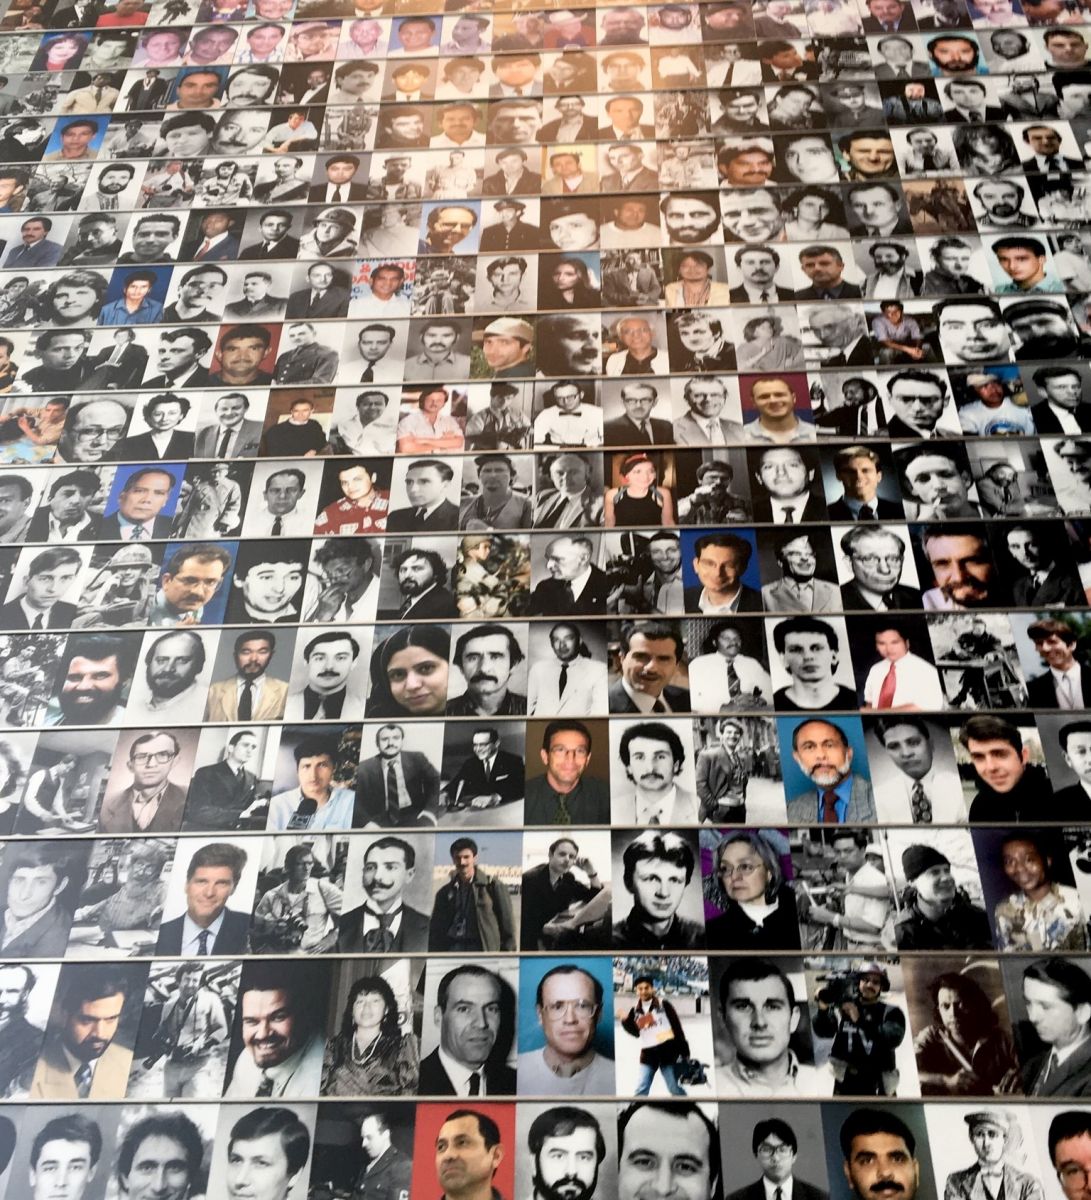 The journalists' memorial at the Newseum in Washington, D.C. (Photo/Melinda Waldrop)